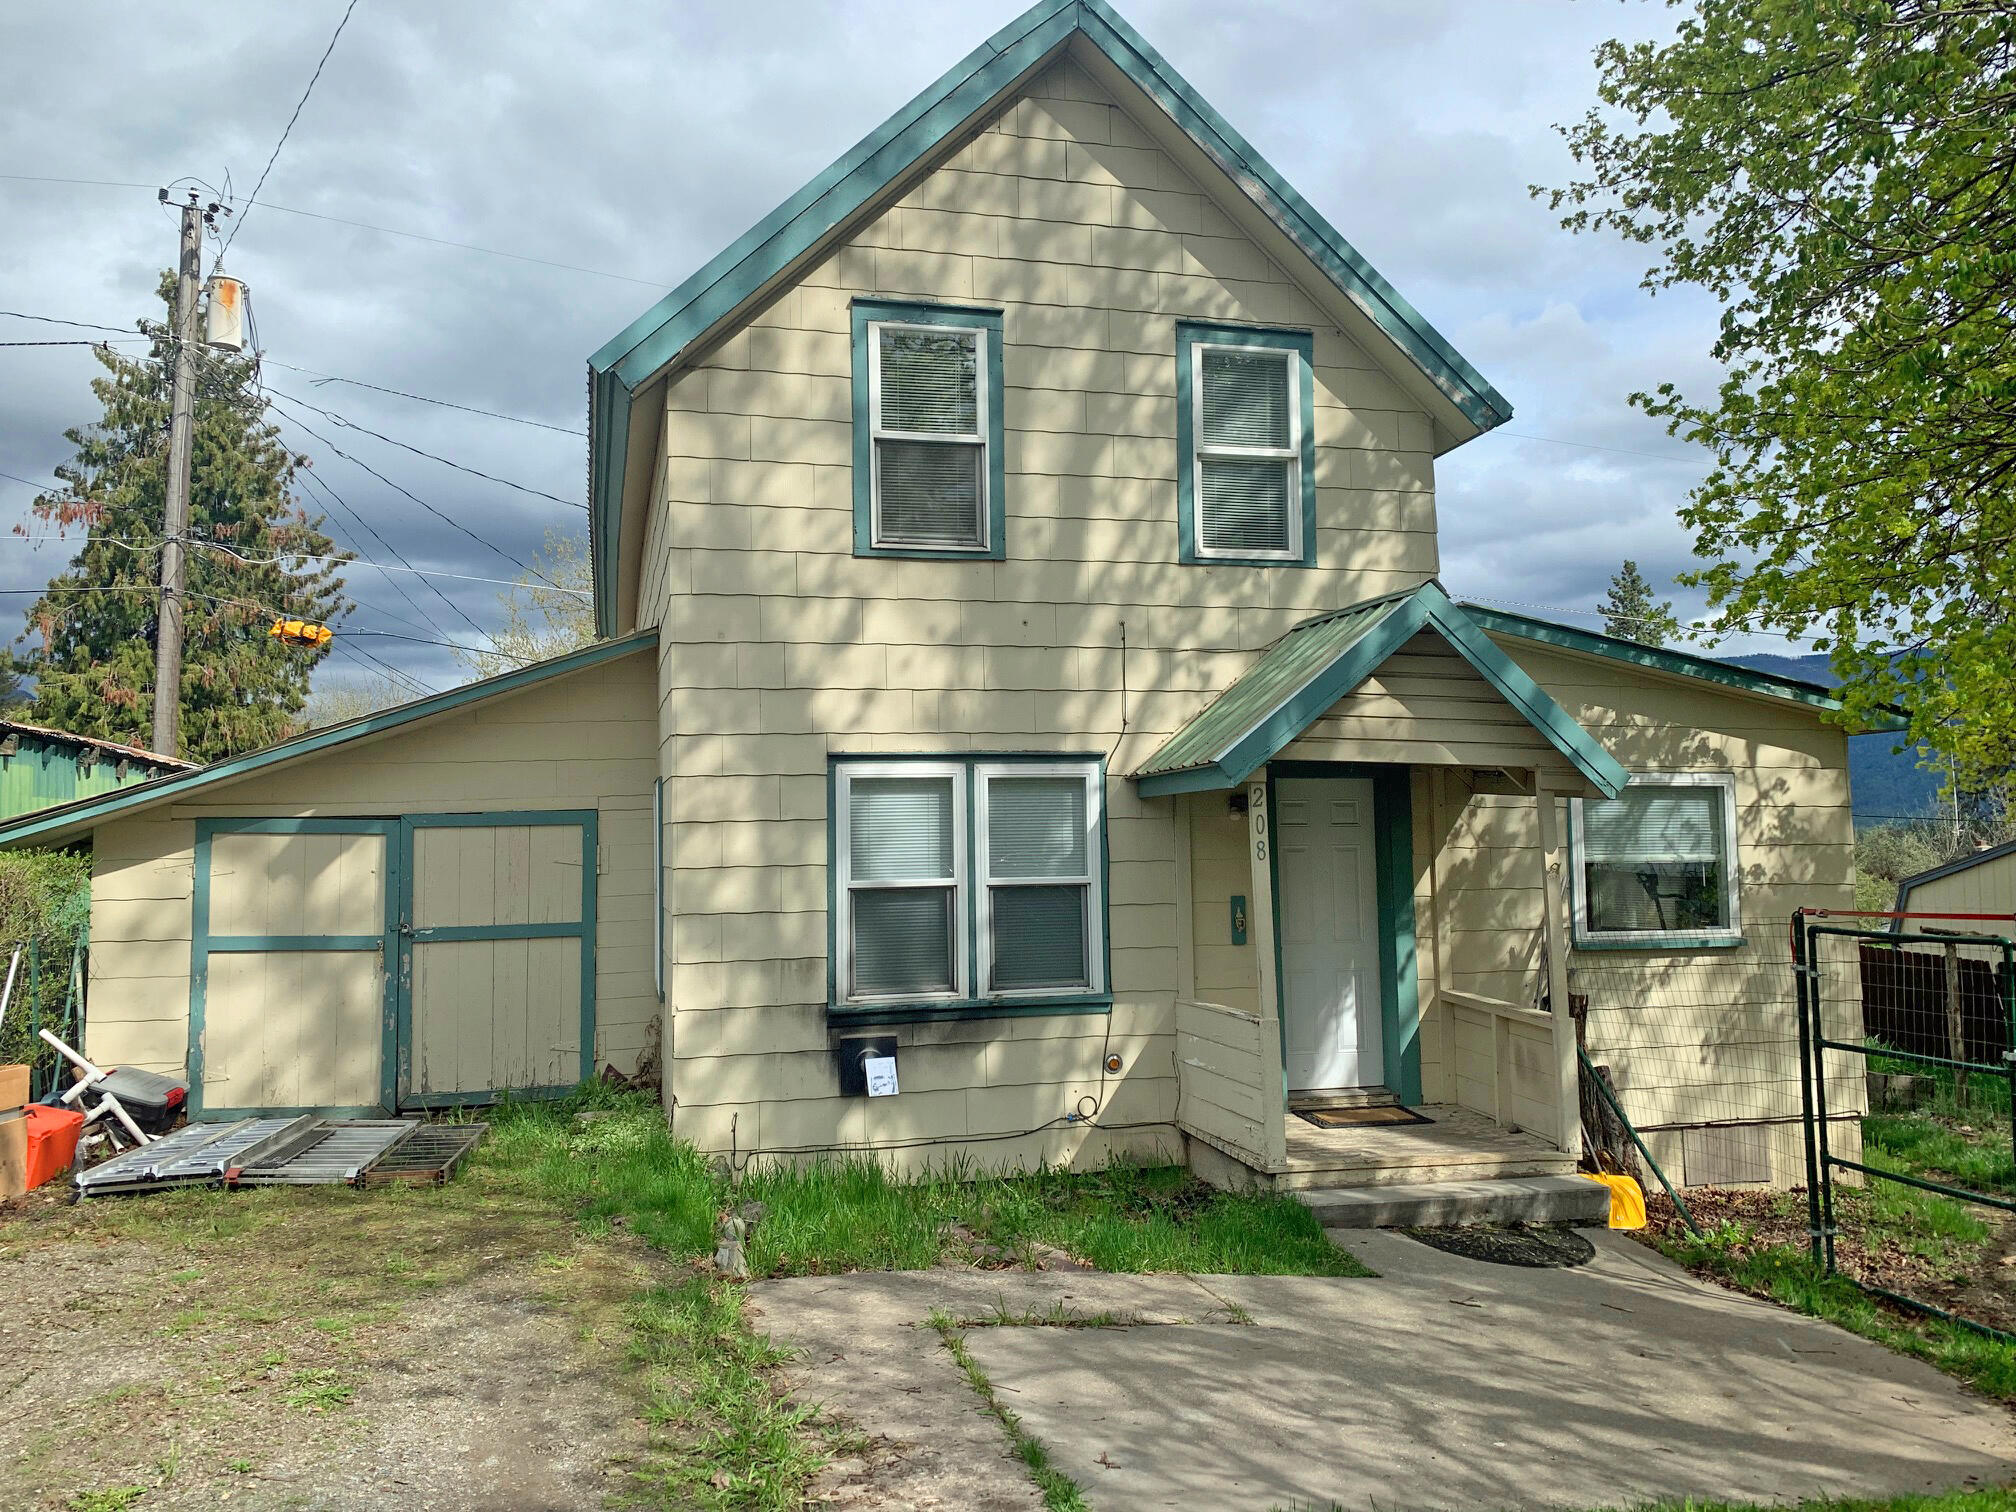 Affordable home in Thompson Falls. 1,300+ sq.ft. 2 bdrm, 1 bath with bonus room. Home sets back from street frontage and has a large yard with several mature trees for shade.